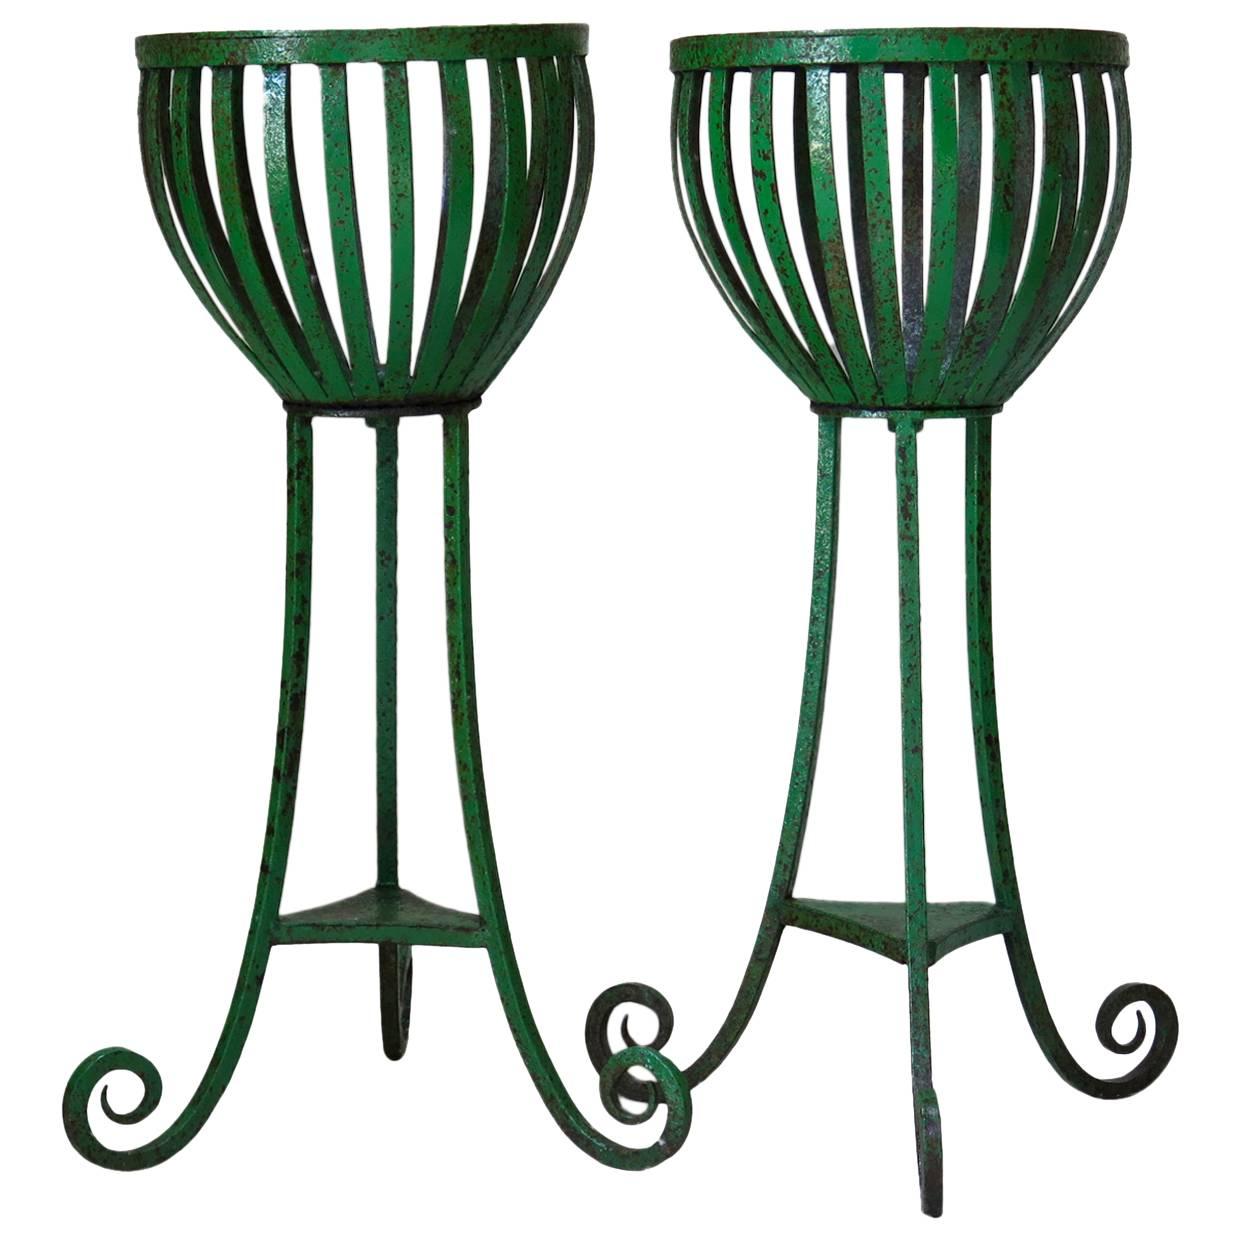 Pair of Wrought-Iron Planters, France, circa 1920s